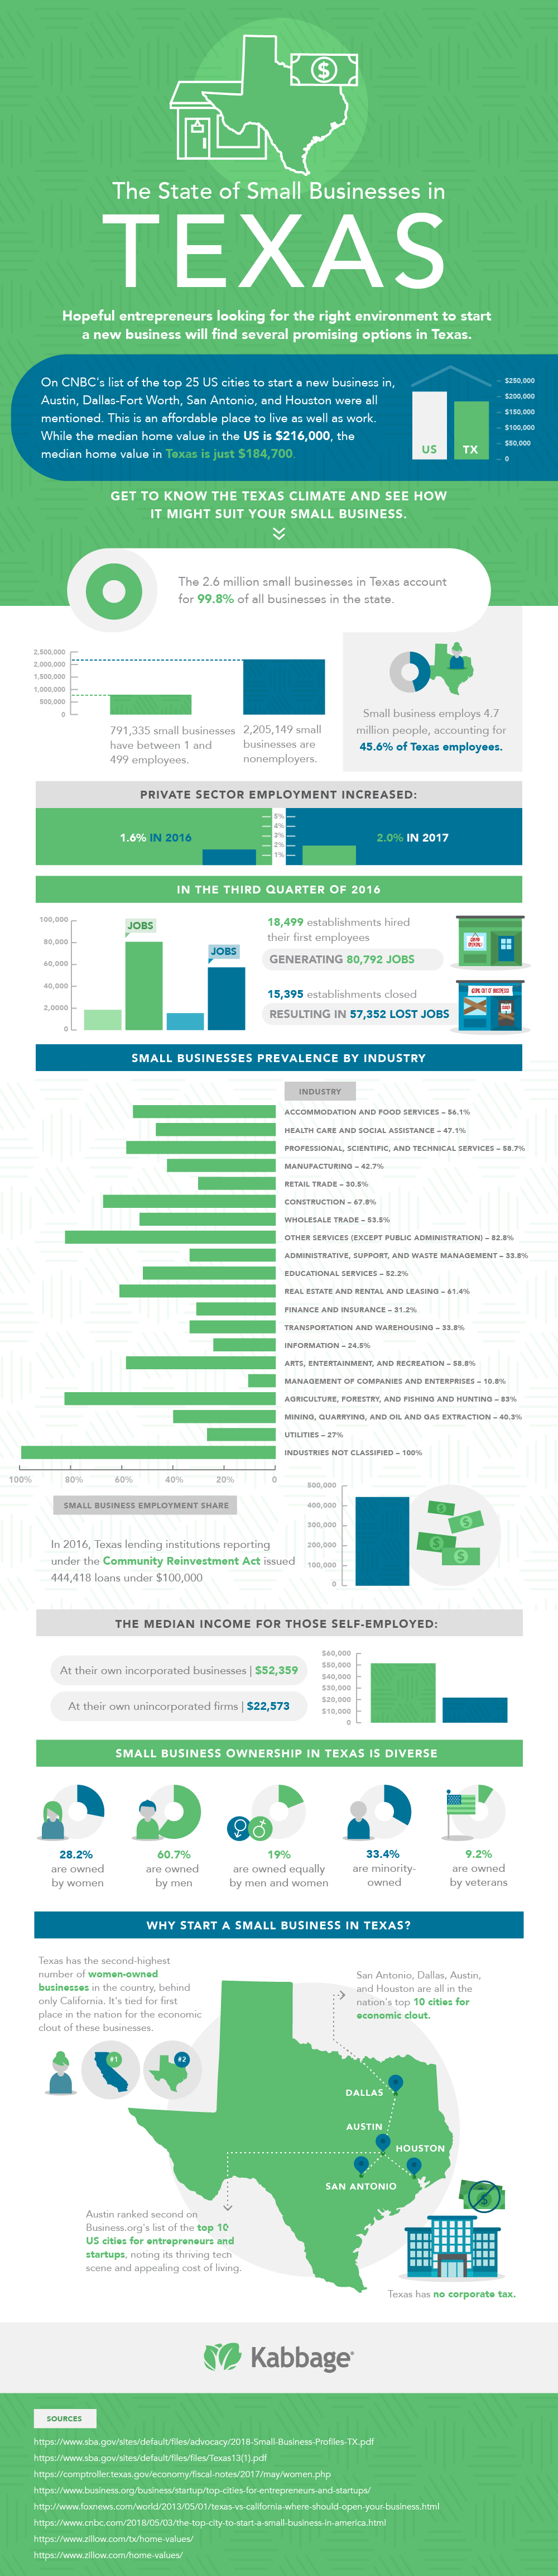 The state of small businesses in Texas - infographic